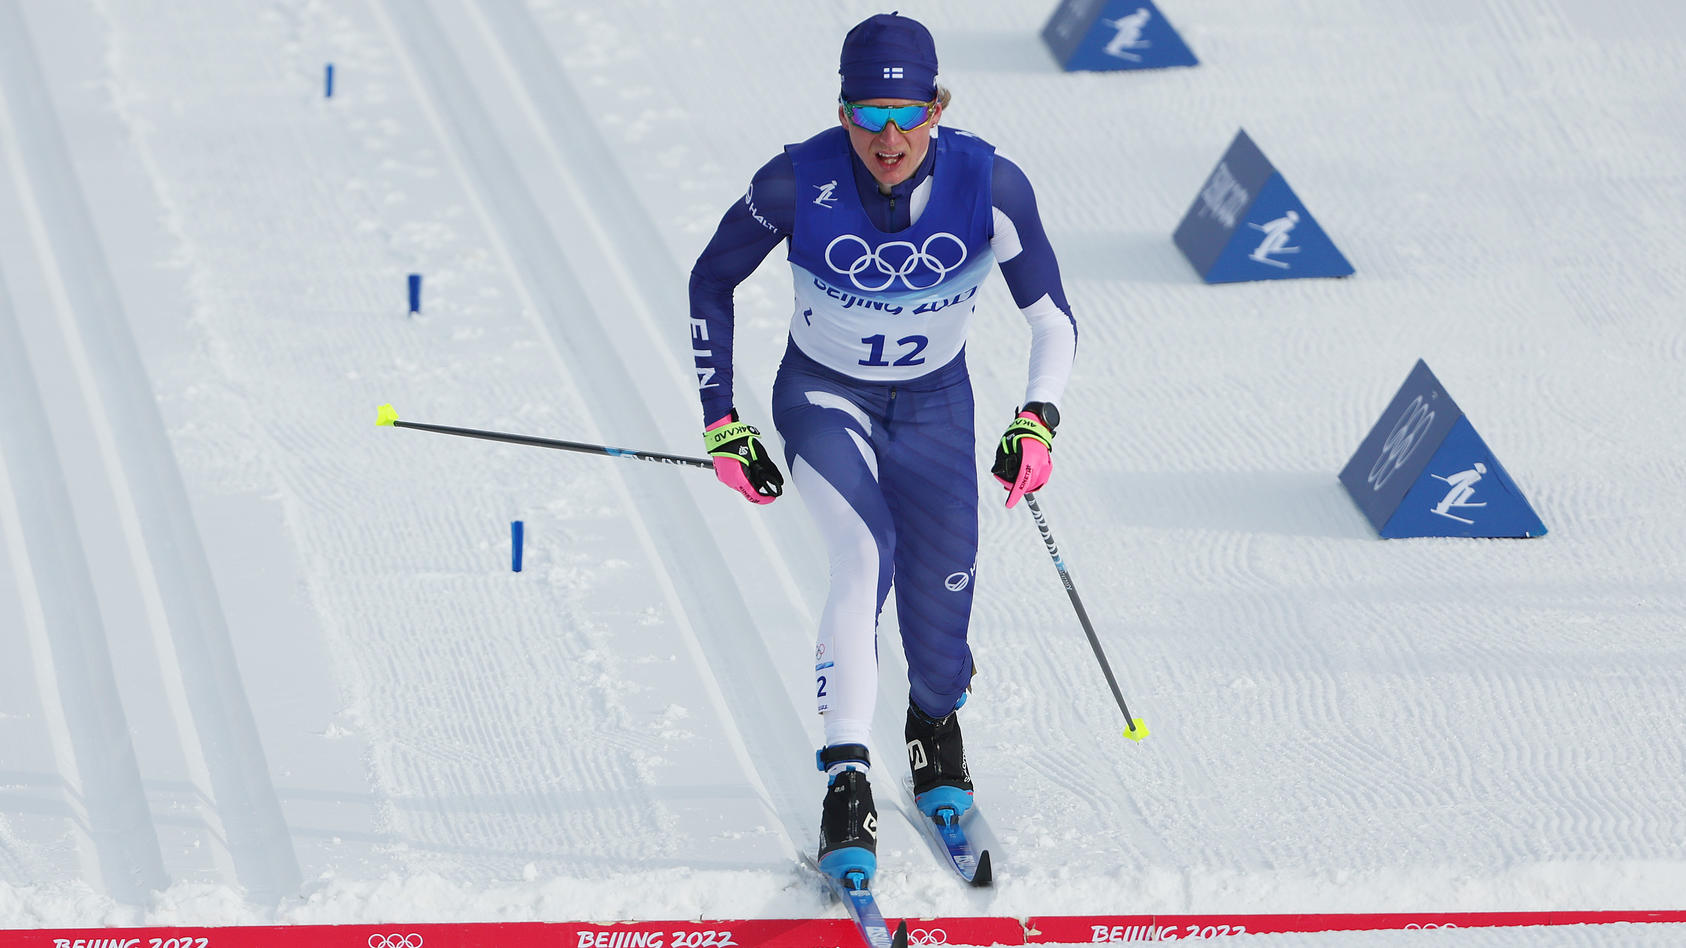 ZHANGJIAKOU, CHINA - FEBRUARY 11: Remi Lindholm of Team Finland crosses the finish line during the Men's Cross-Country Skiing 15km Classic on Day 7 of  Beijing 2022 Winter Olympics at The National Cross-Country Skiing Centre on February 11, 2022 in Z